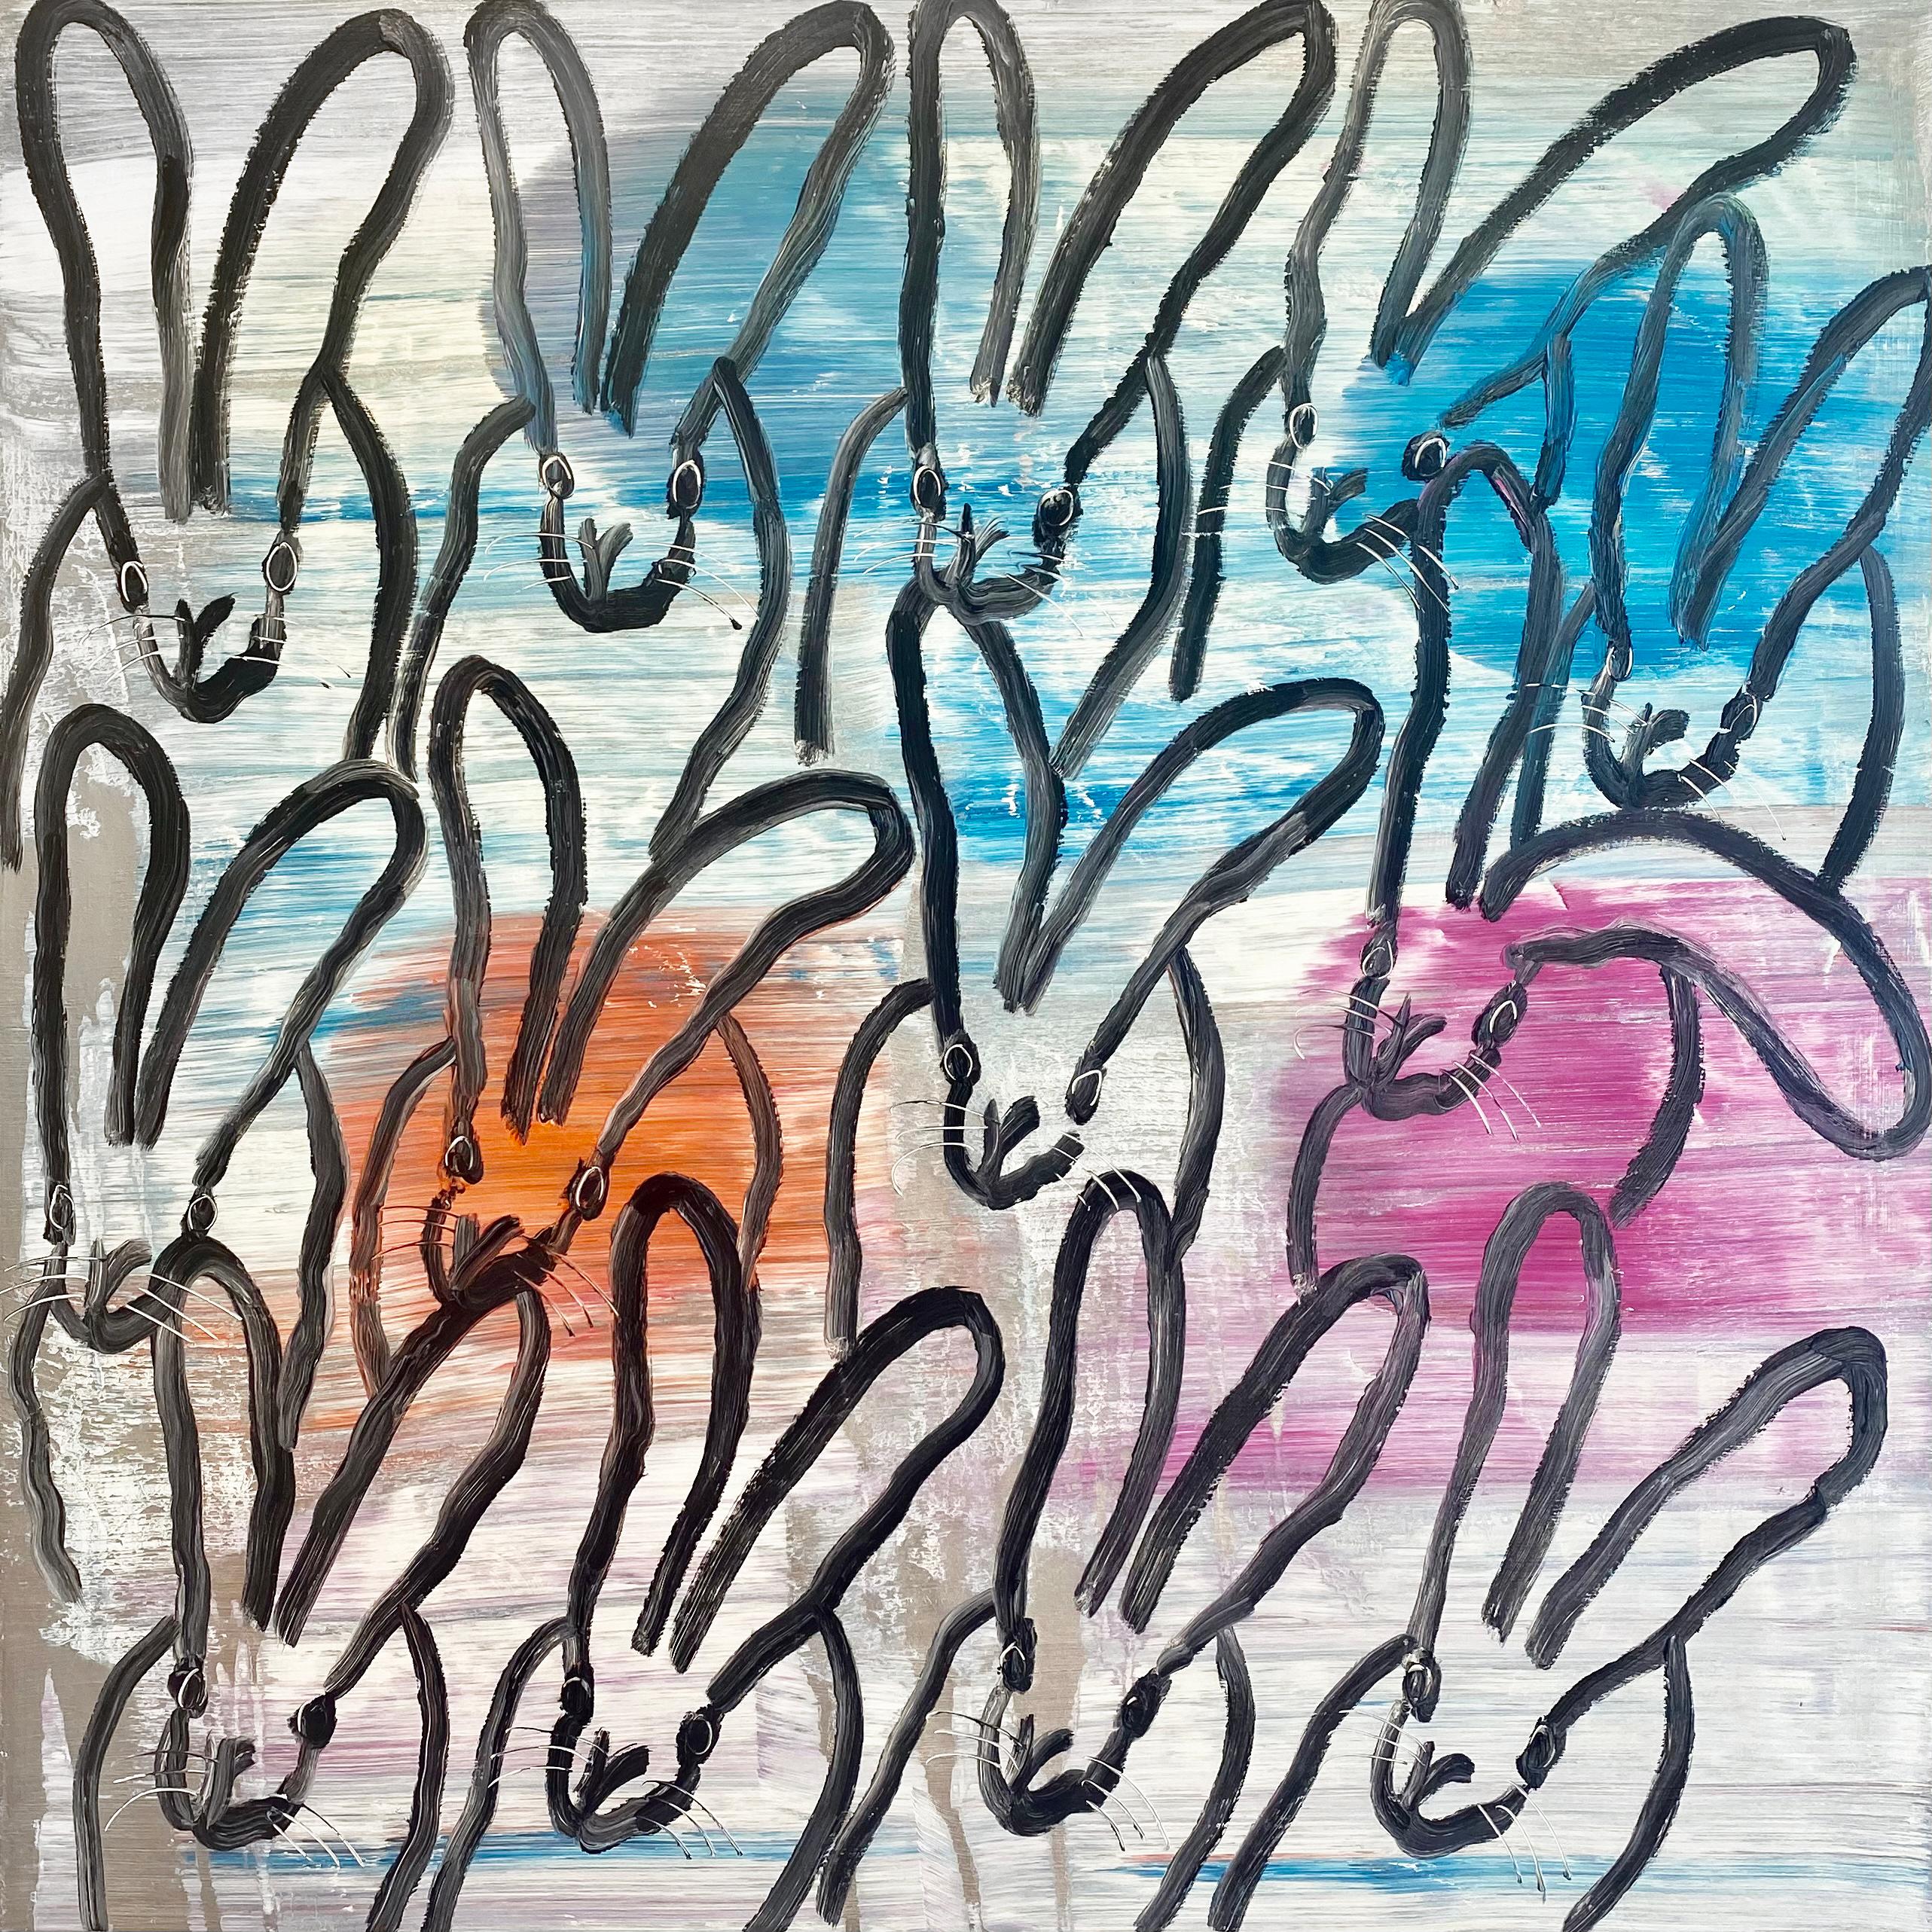 'Chinensis The Mother' by Hunt Slonem, 2021. Oil on canvas, 48 x 48 in. This painting features Slonem's signature bunnies outlined in black over swirling colors of silver, pink, orange, and blue.

This novel ‘bunnies’ painting is influenced by the